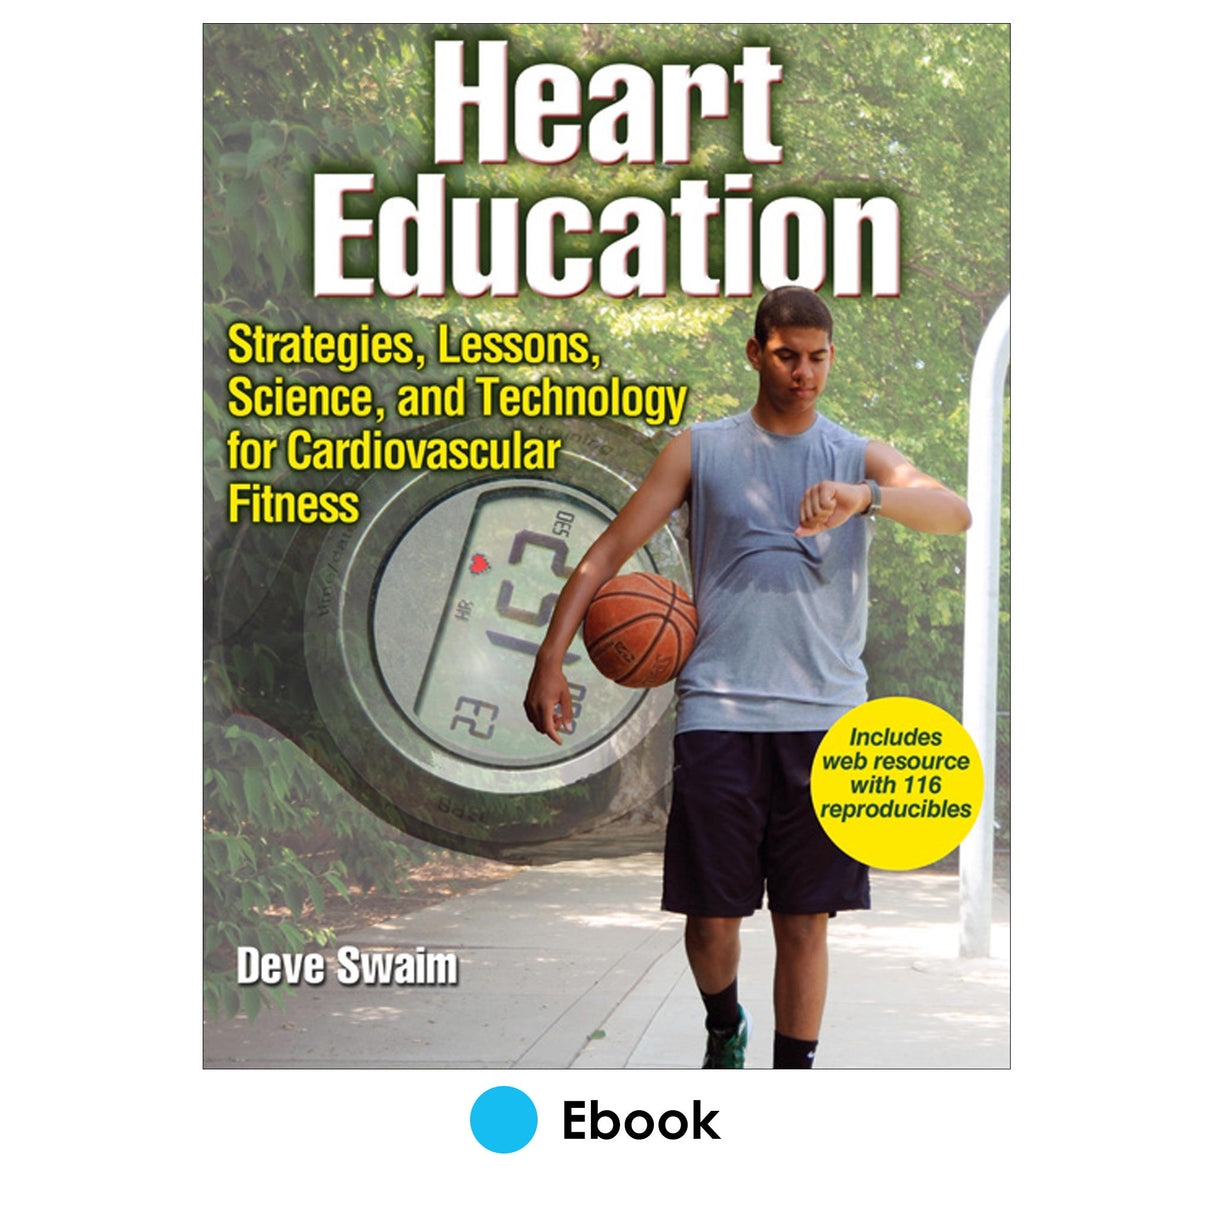 Heart Education PDF With Web Resource